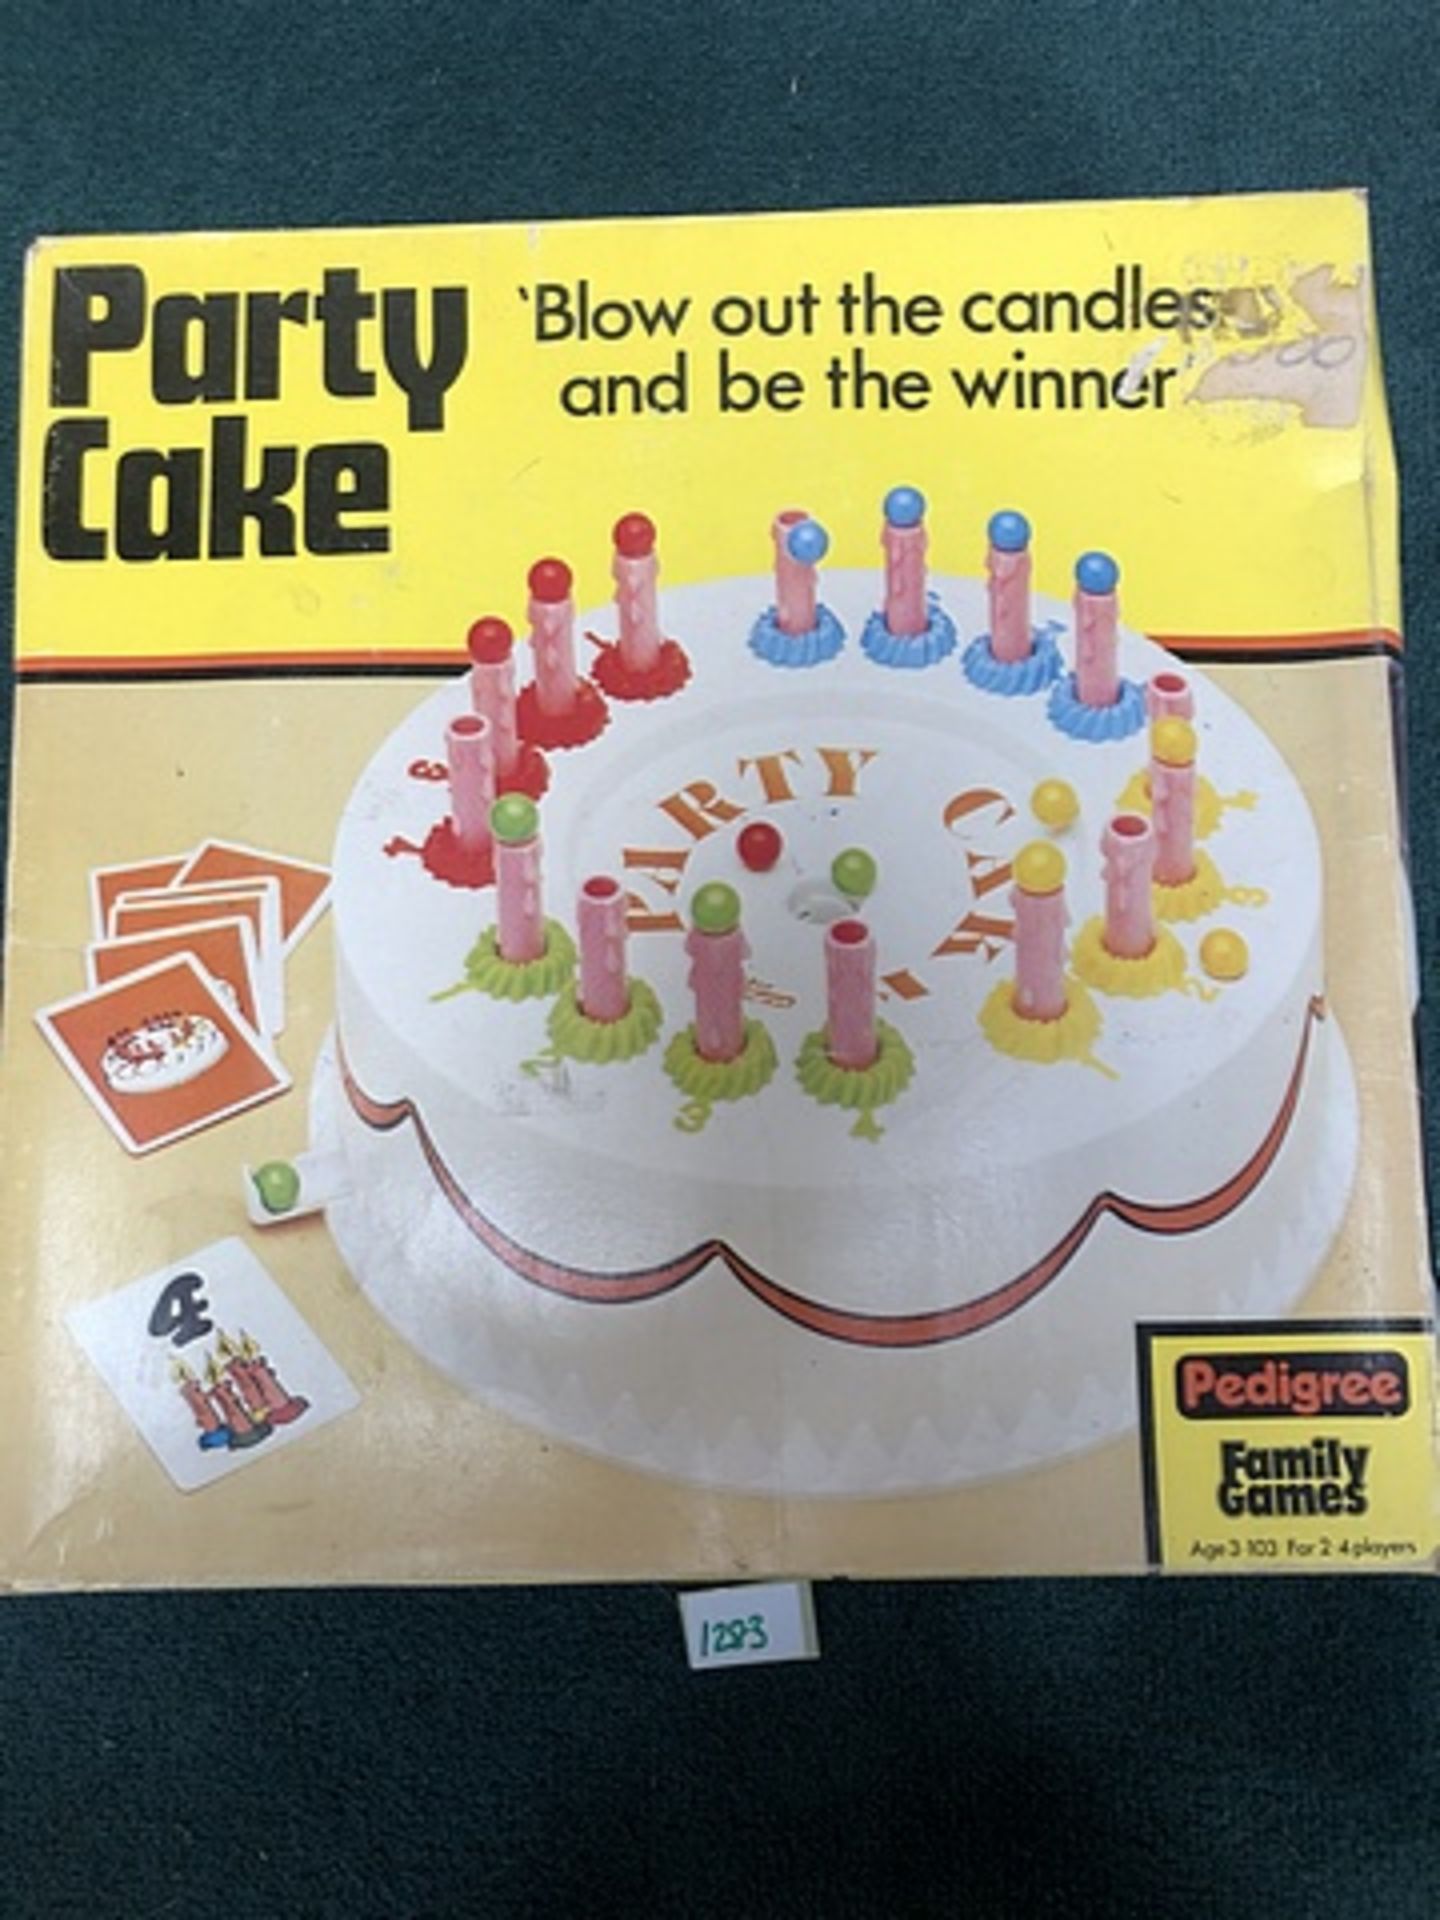 Pedigree Party Cake Blow Out The Candles And Be The Winner Game - Complete With Box